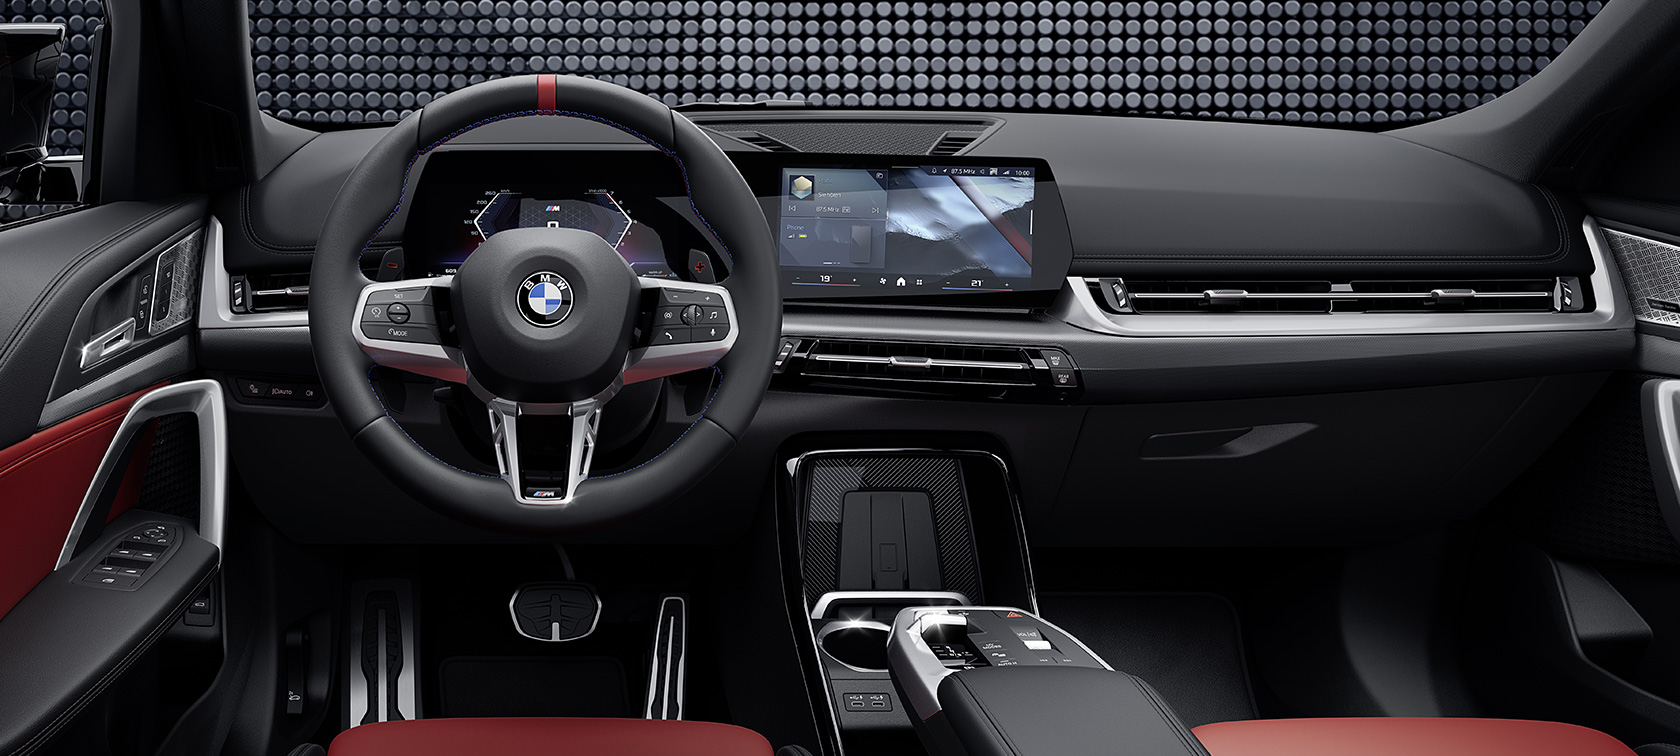 BMW X1 M35i xDrive Detail interior steering wheel and display